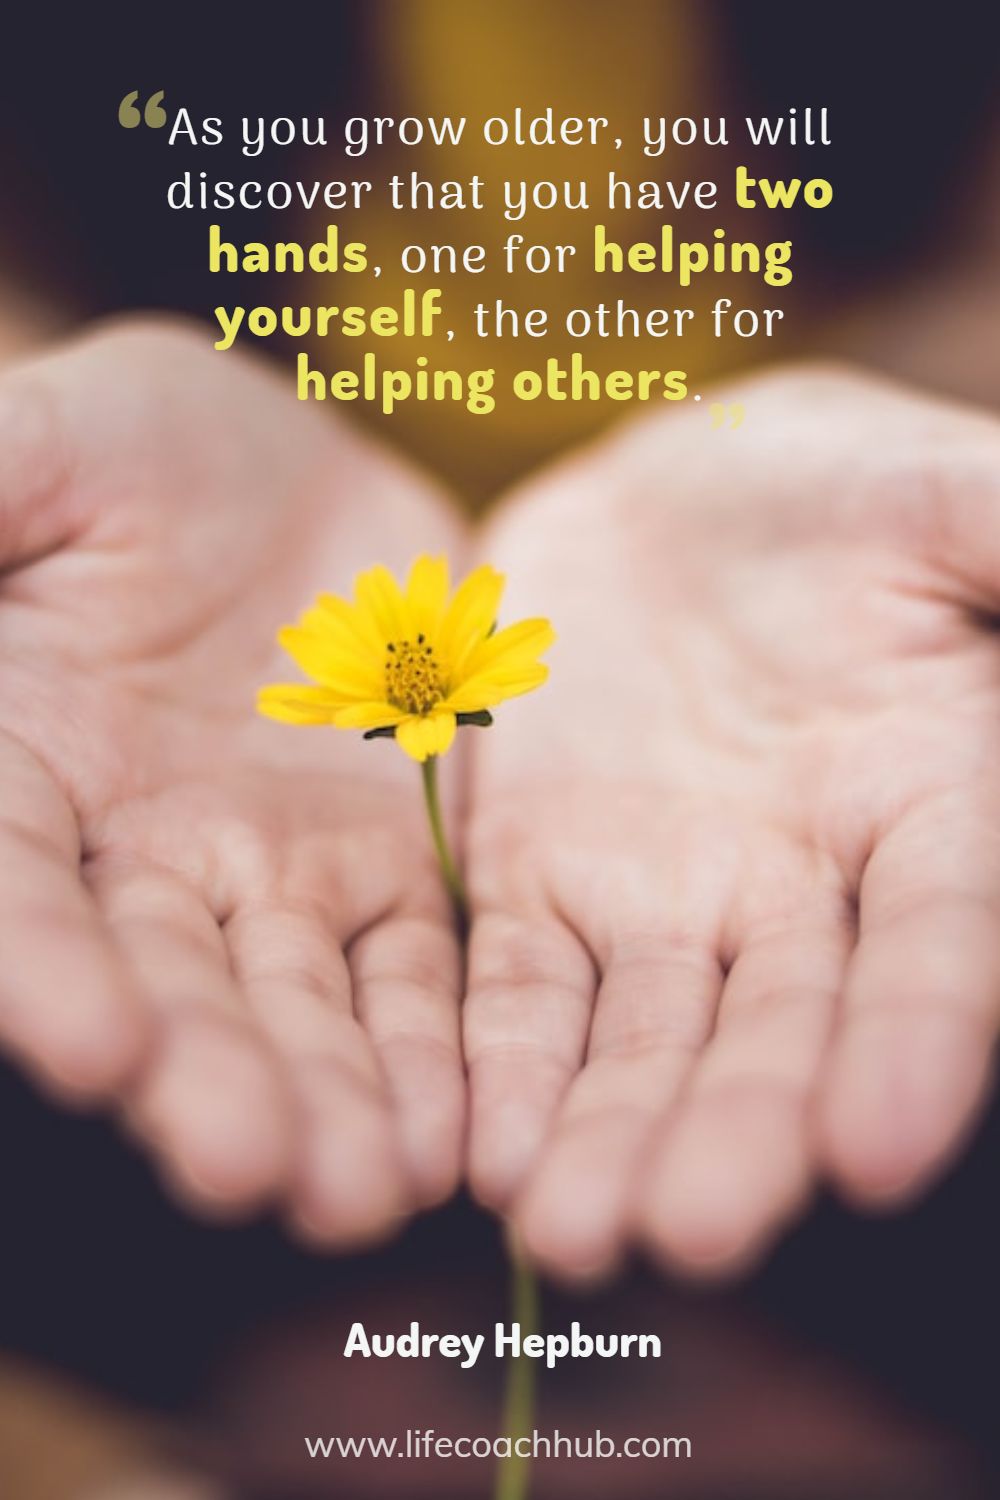 As you grow older, you will discover that you have two hands, one for helping yourself, the other for helping others. Audrey Hepburn Coaching Quote